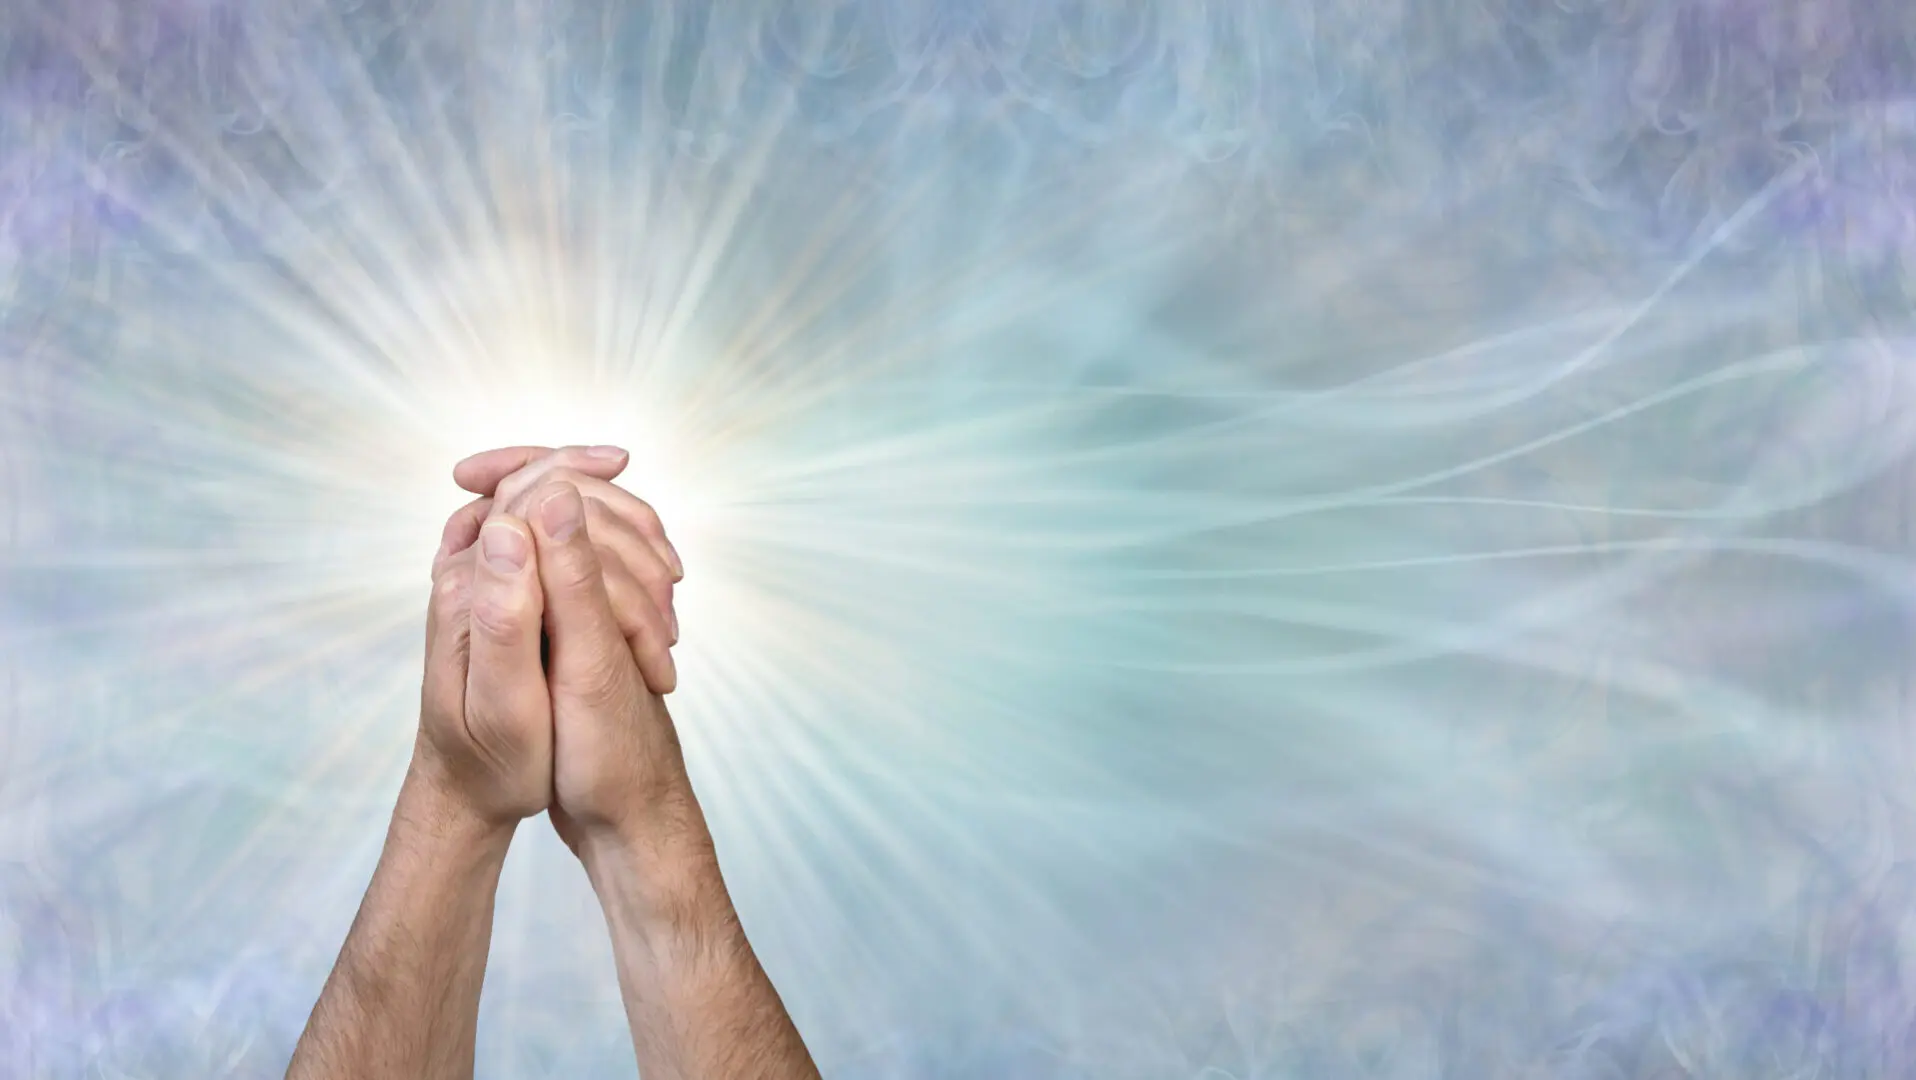 male hands in clasped prayer position against a wispy flowing blue background with copy space for message or religious prayer